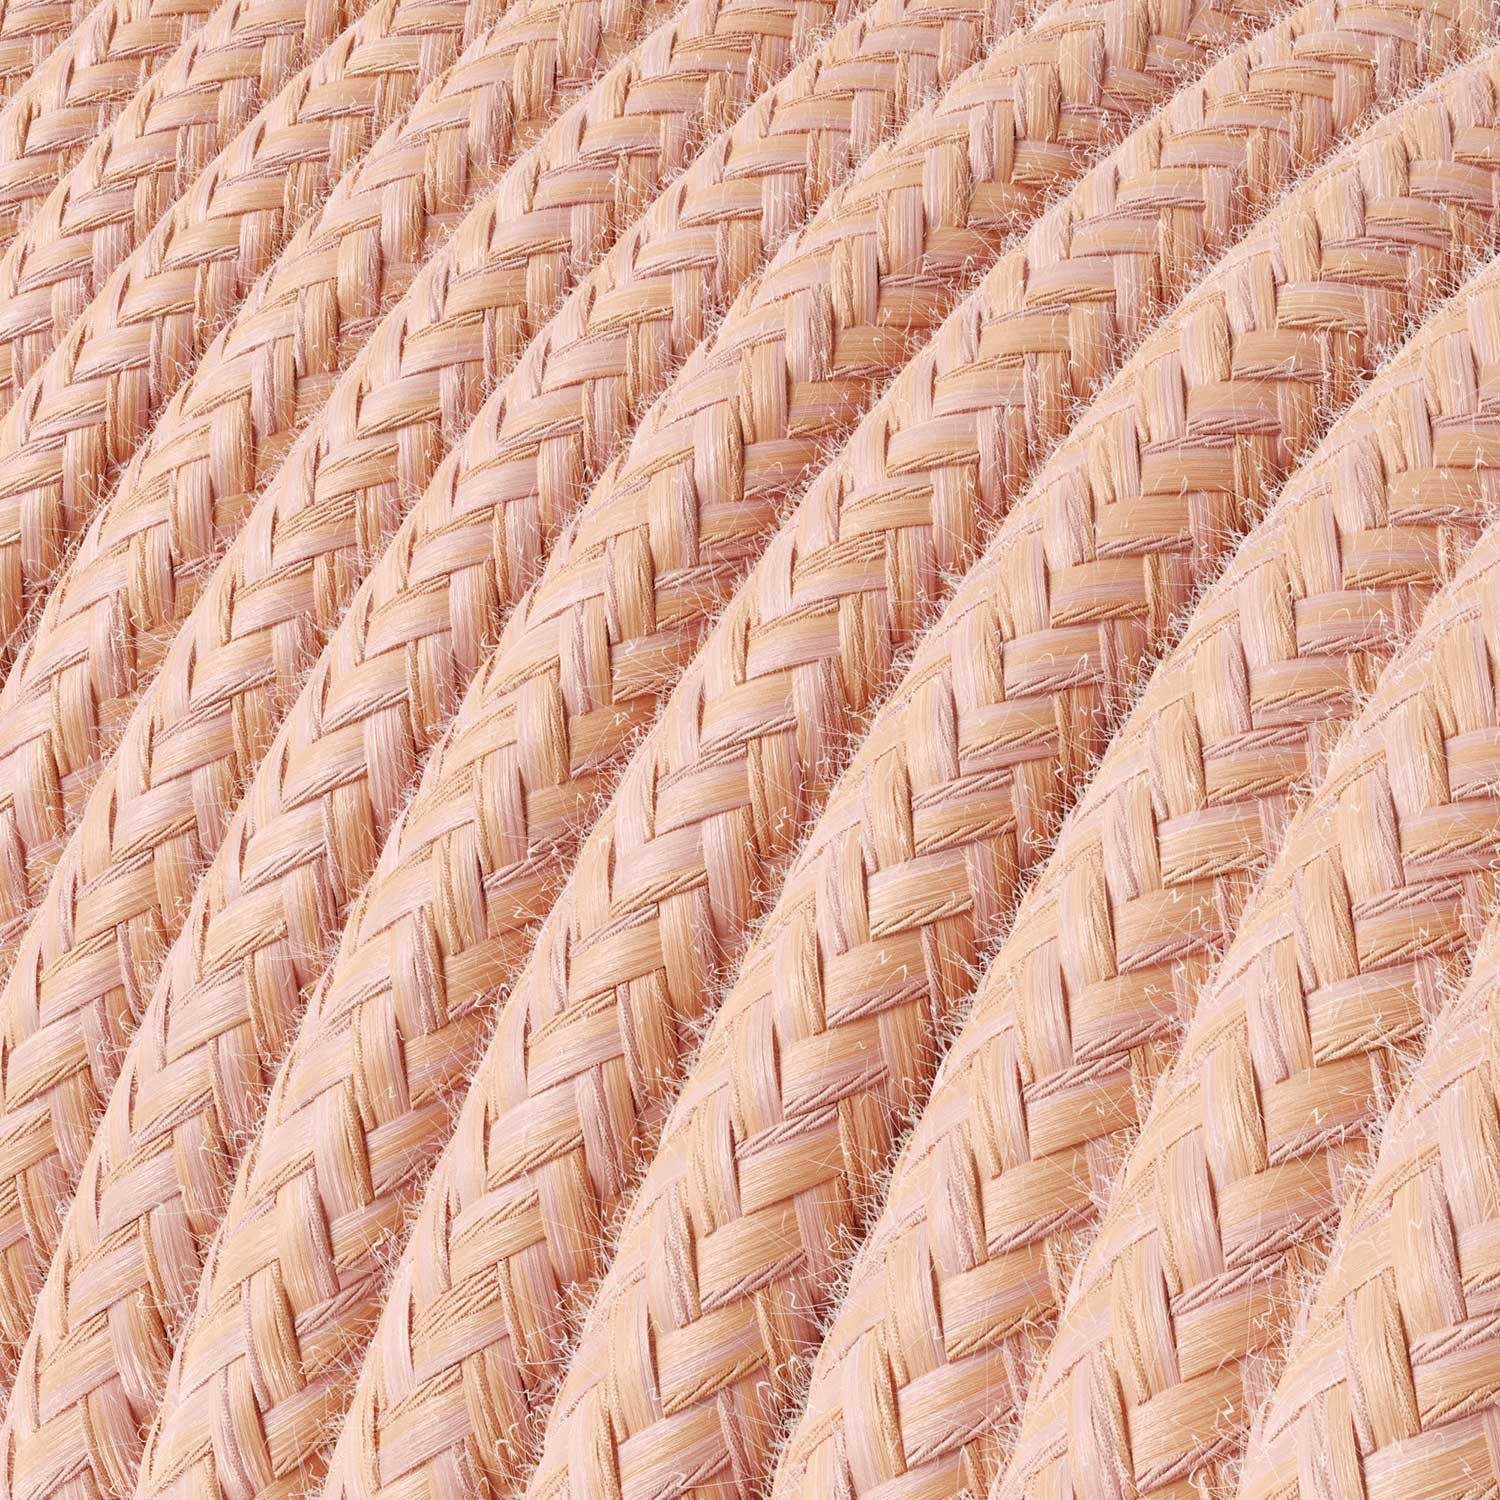 Round Electric Cable covered in Cotton - Salmon RX13